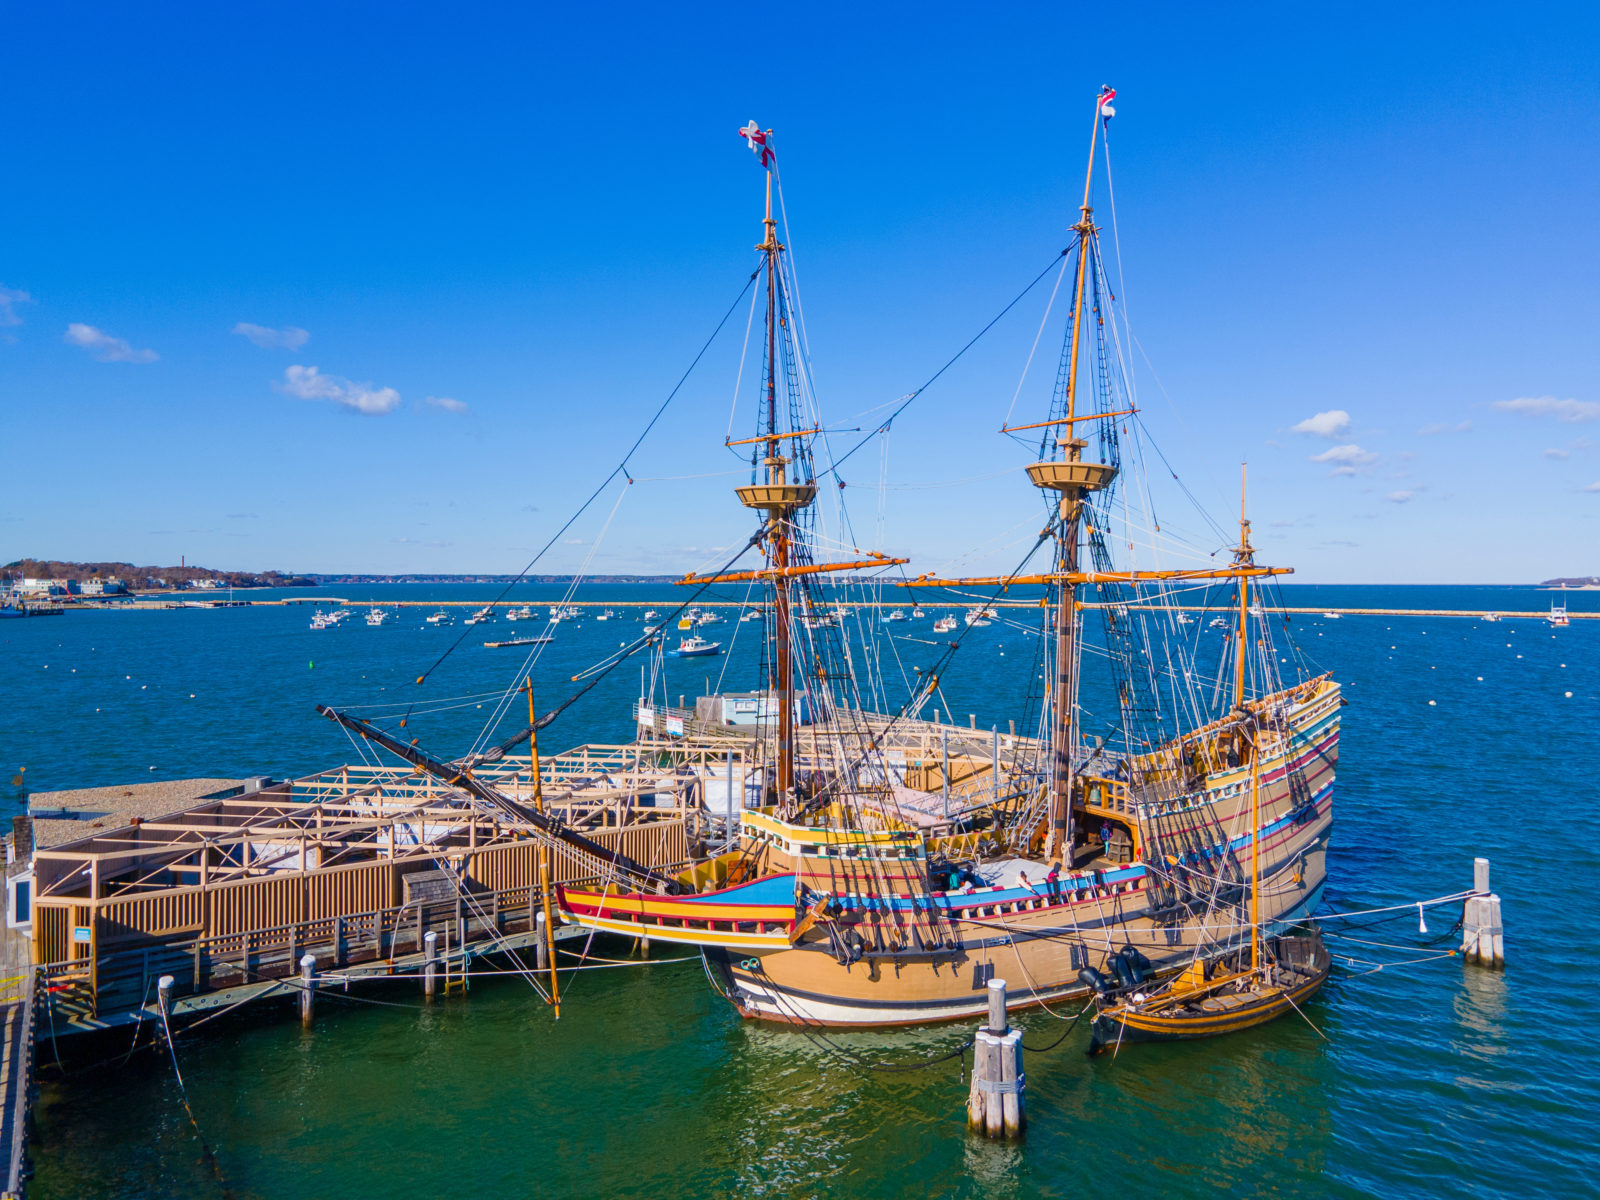 Mayflower II is a reproduction of the 17th century ship Mayflower docked at town of Plymouth, Massachusetts MA, USA.